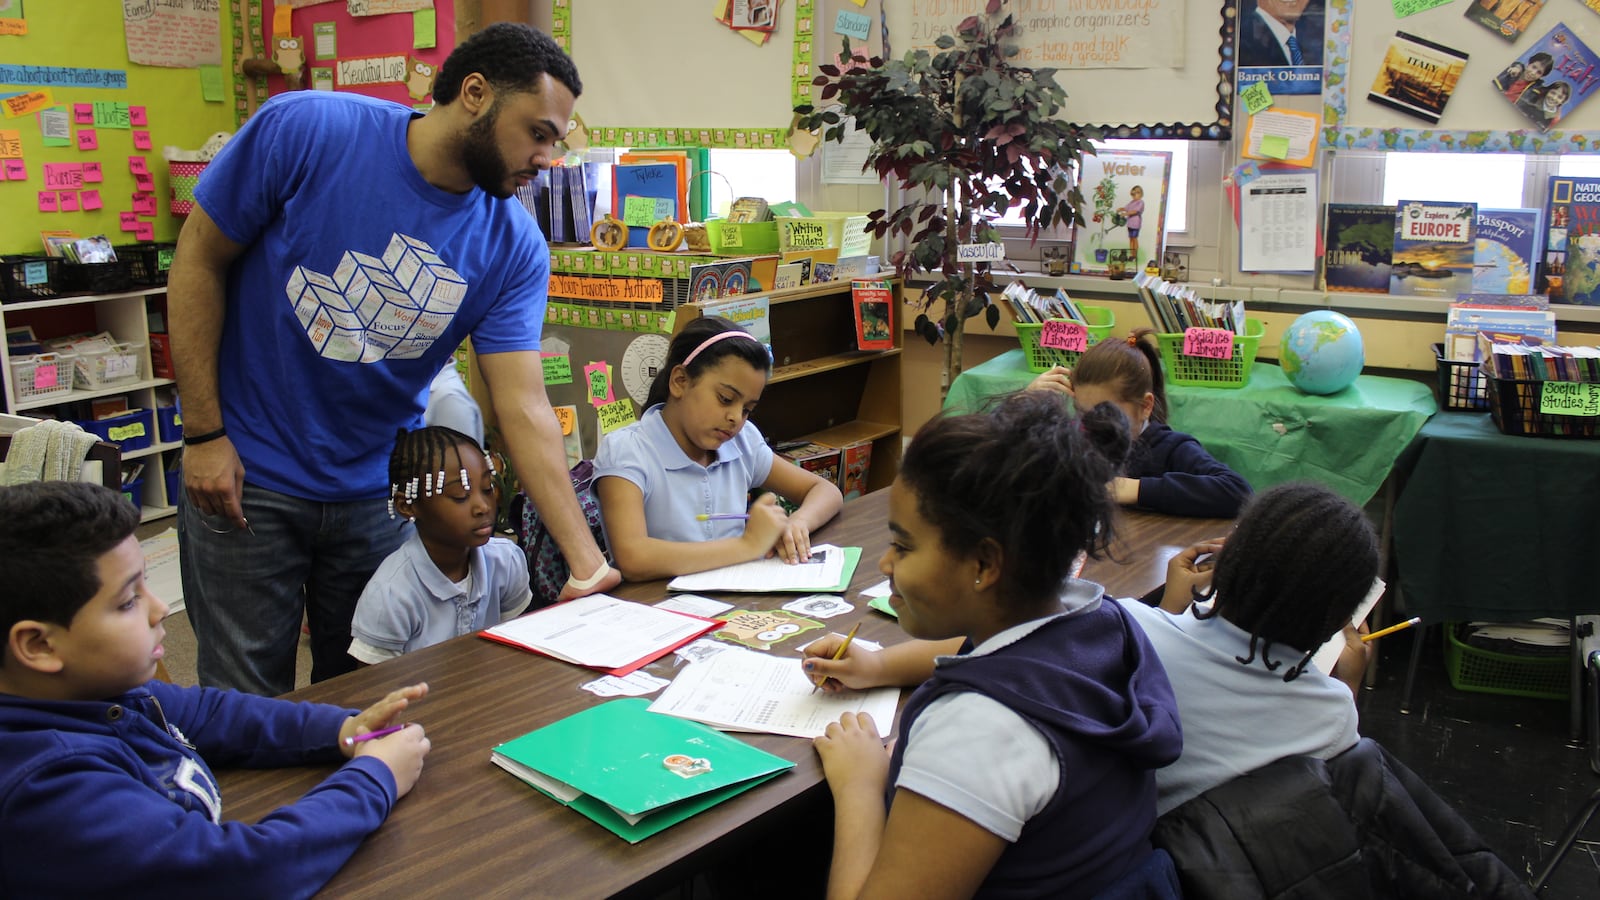 Students participate in after-school activities at the community school at P.S. 61 Francisco Oller in the Bronx.